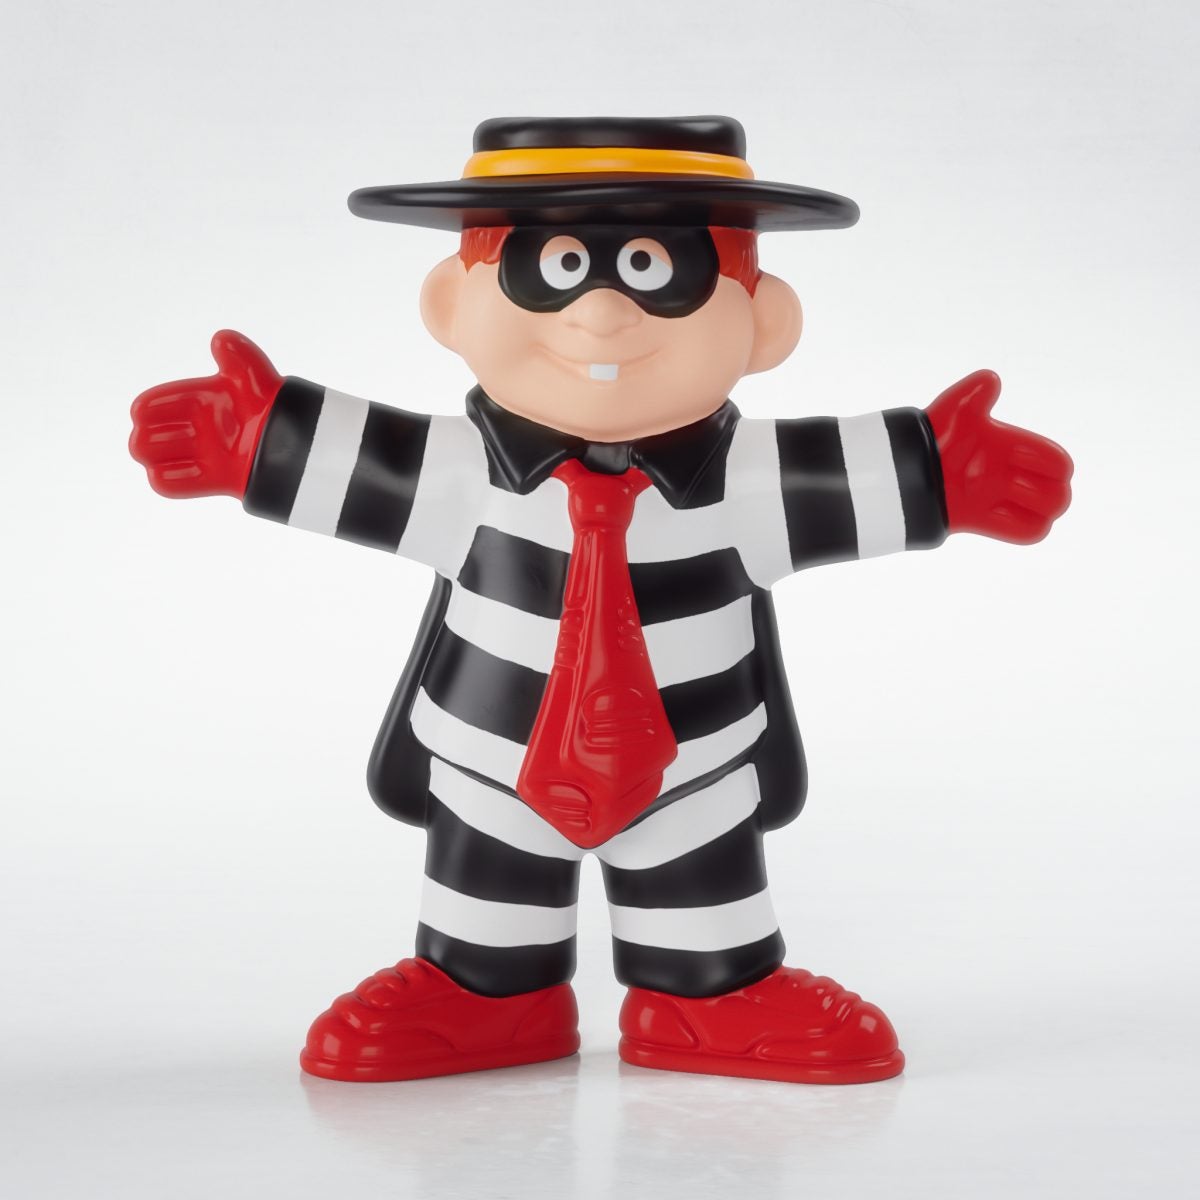 Iconic McDonald's Happy Meal Toys From Our Childhood Available From Nov 28 & We're Feeling Nostalgic - WORLD OF BUZZ 16